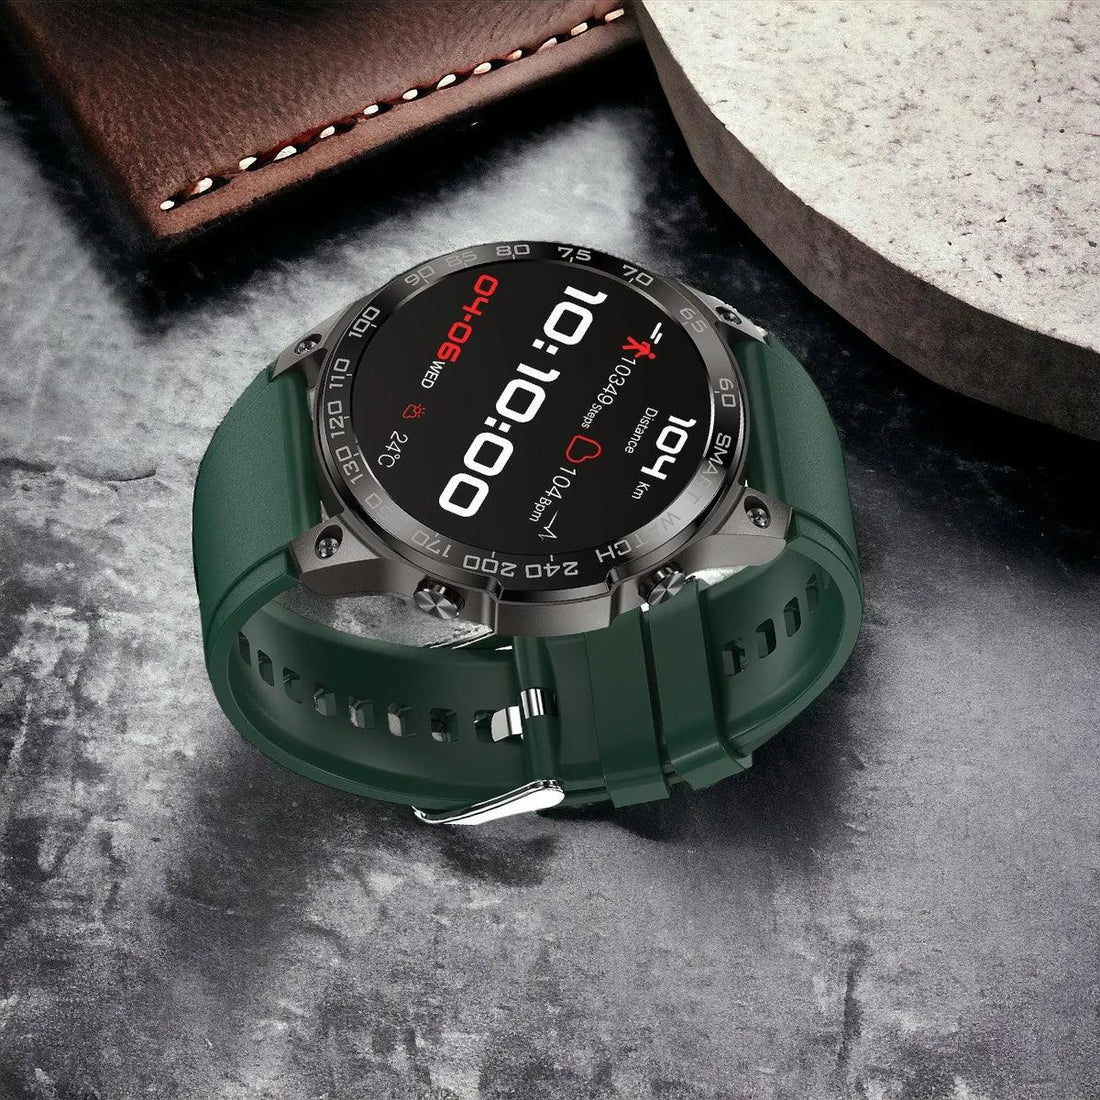 DM50 Smartwatch: The Essential Accessory for Active Men - Touchy Style